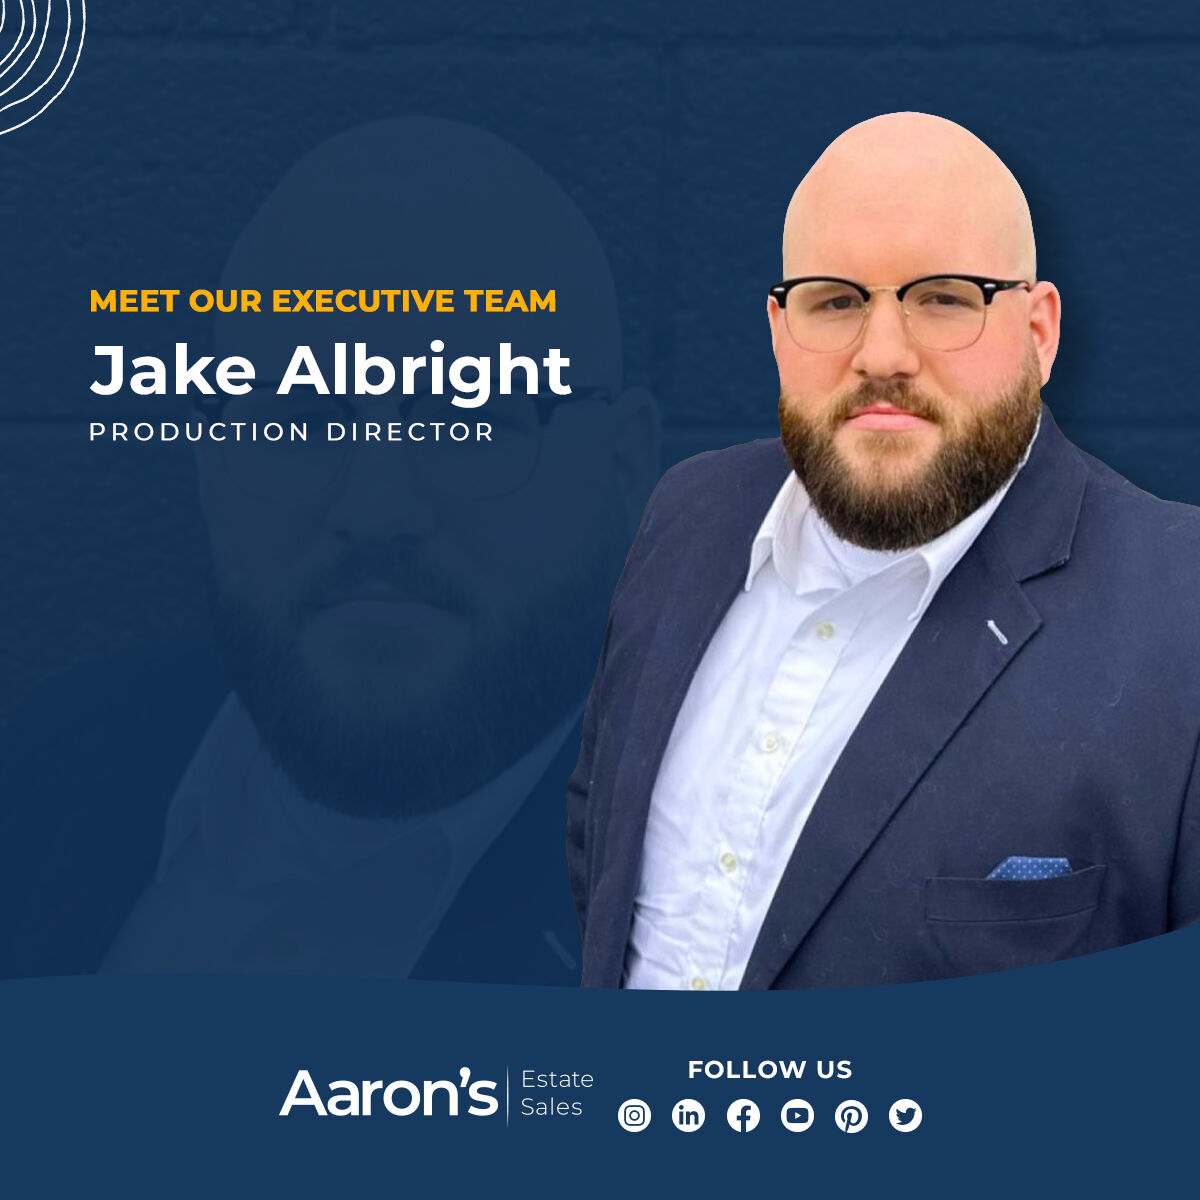 Get to know the wizard behind our estate sale productions.

Jake Albright, our Production Director, ensures our estate sales are nothing short of spectacular from concept to execution.🎥 

#ProductionDirector #EventManagement #BehindTheScenes #EventPlanning #CreativeDirector